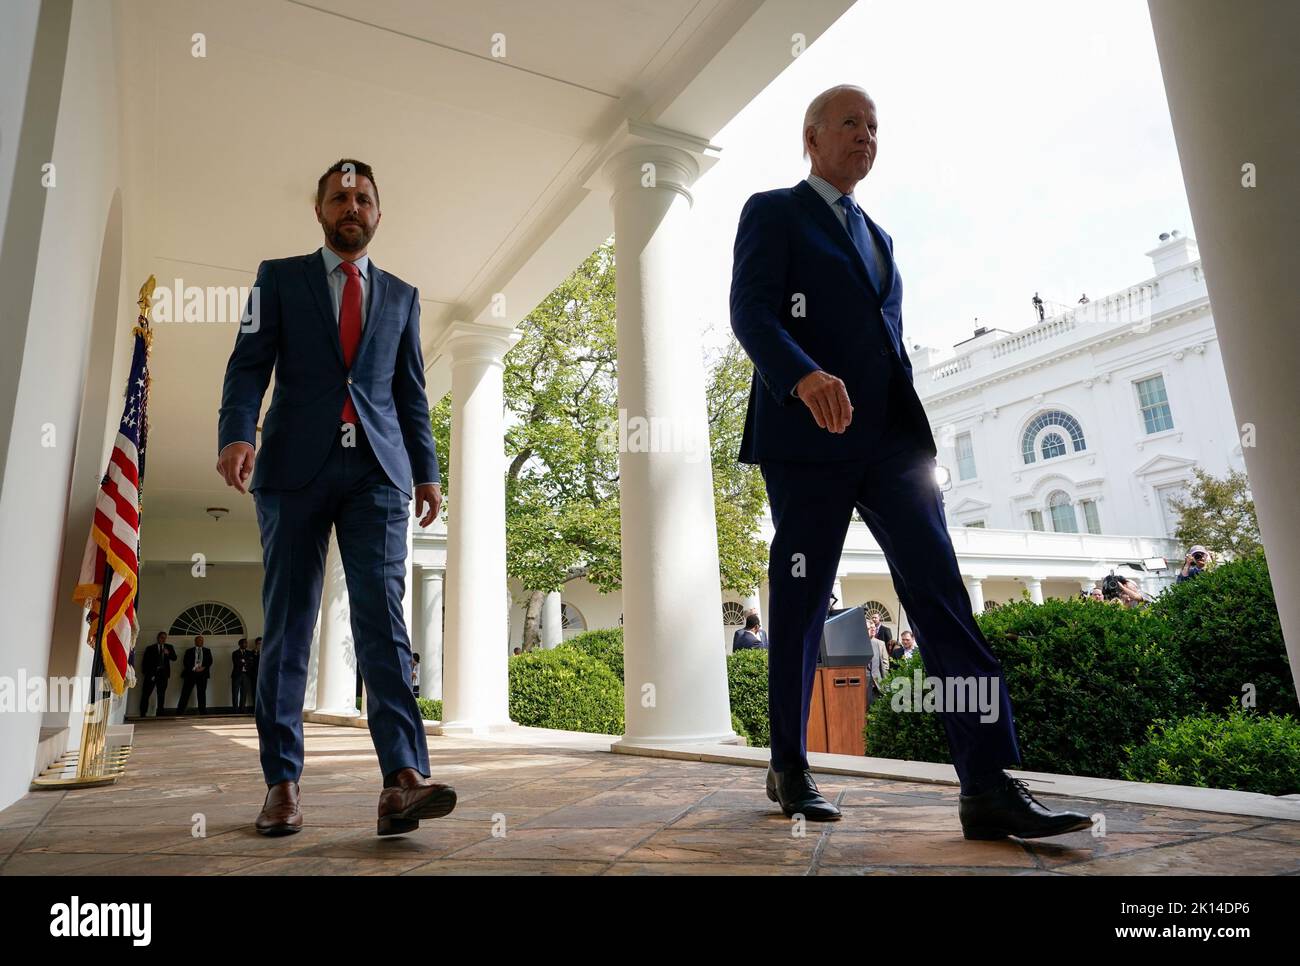 U.S. President Joe Biden and head of the White House National Economic Council Brian Deese walk back to the Oval office after Biden spoke on the tentative deal that U.S. railroads and unions secured to avert a rail shutdown, at the White House in Washington, U.S., September 15, 2022. REUTERS/Kevin Lamarque Stock Photo